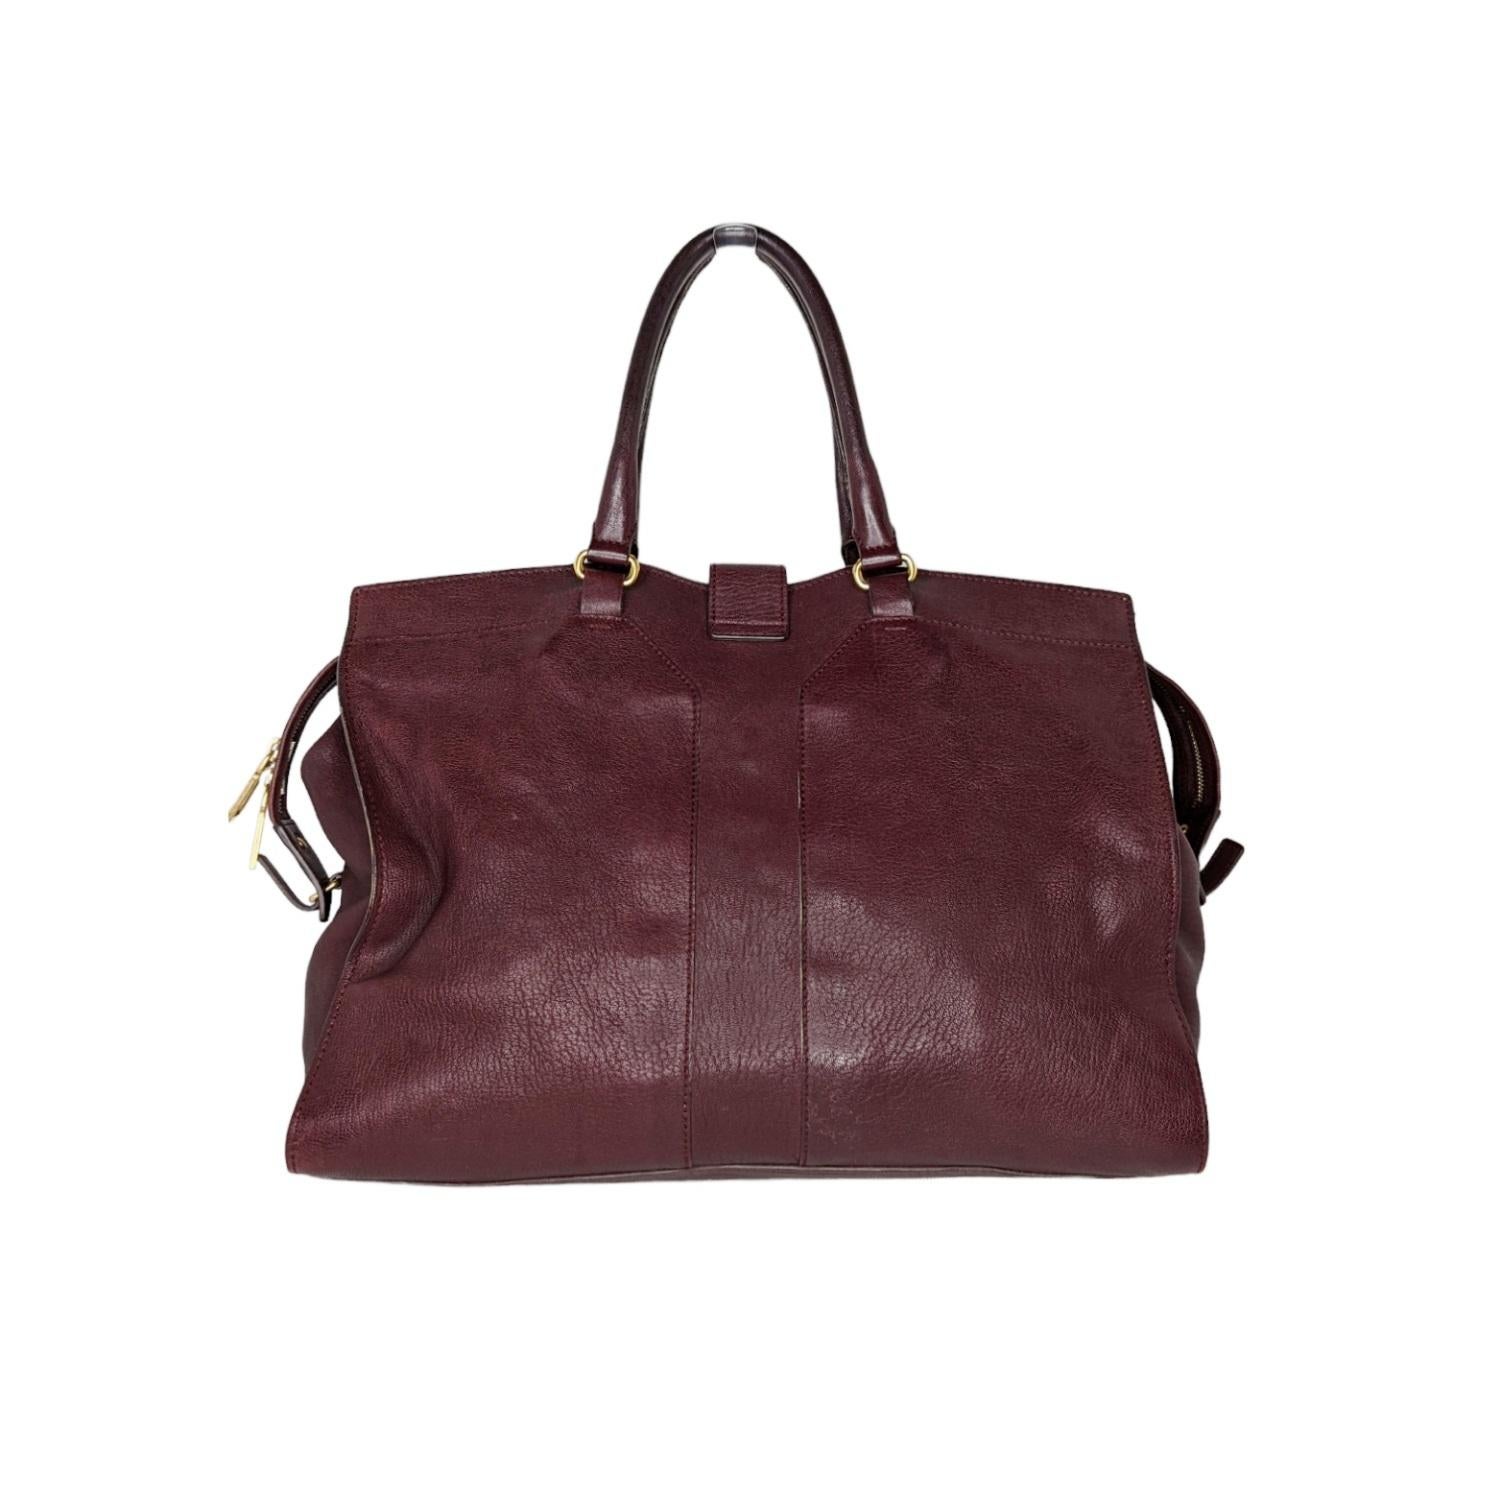 This chic tote is crafted of smooth sheepskin leather in Burgundy. The bag features rolled leather top handles with a gold weighted Y pendant. This opens to a spacious fabric interior with a zipper and patch pockets.

Designer: YSL Saint